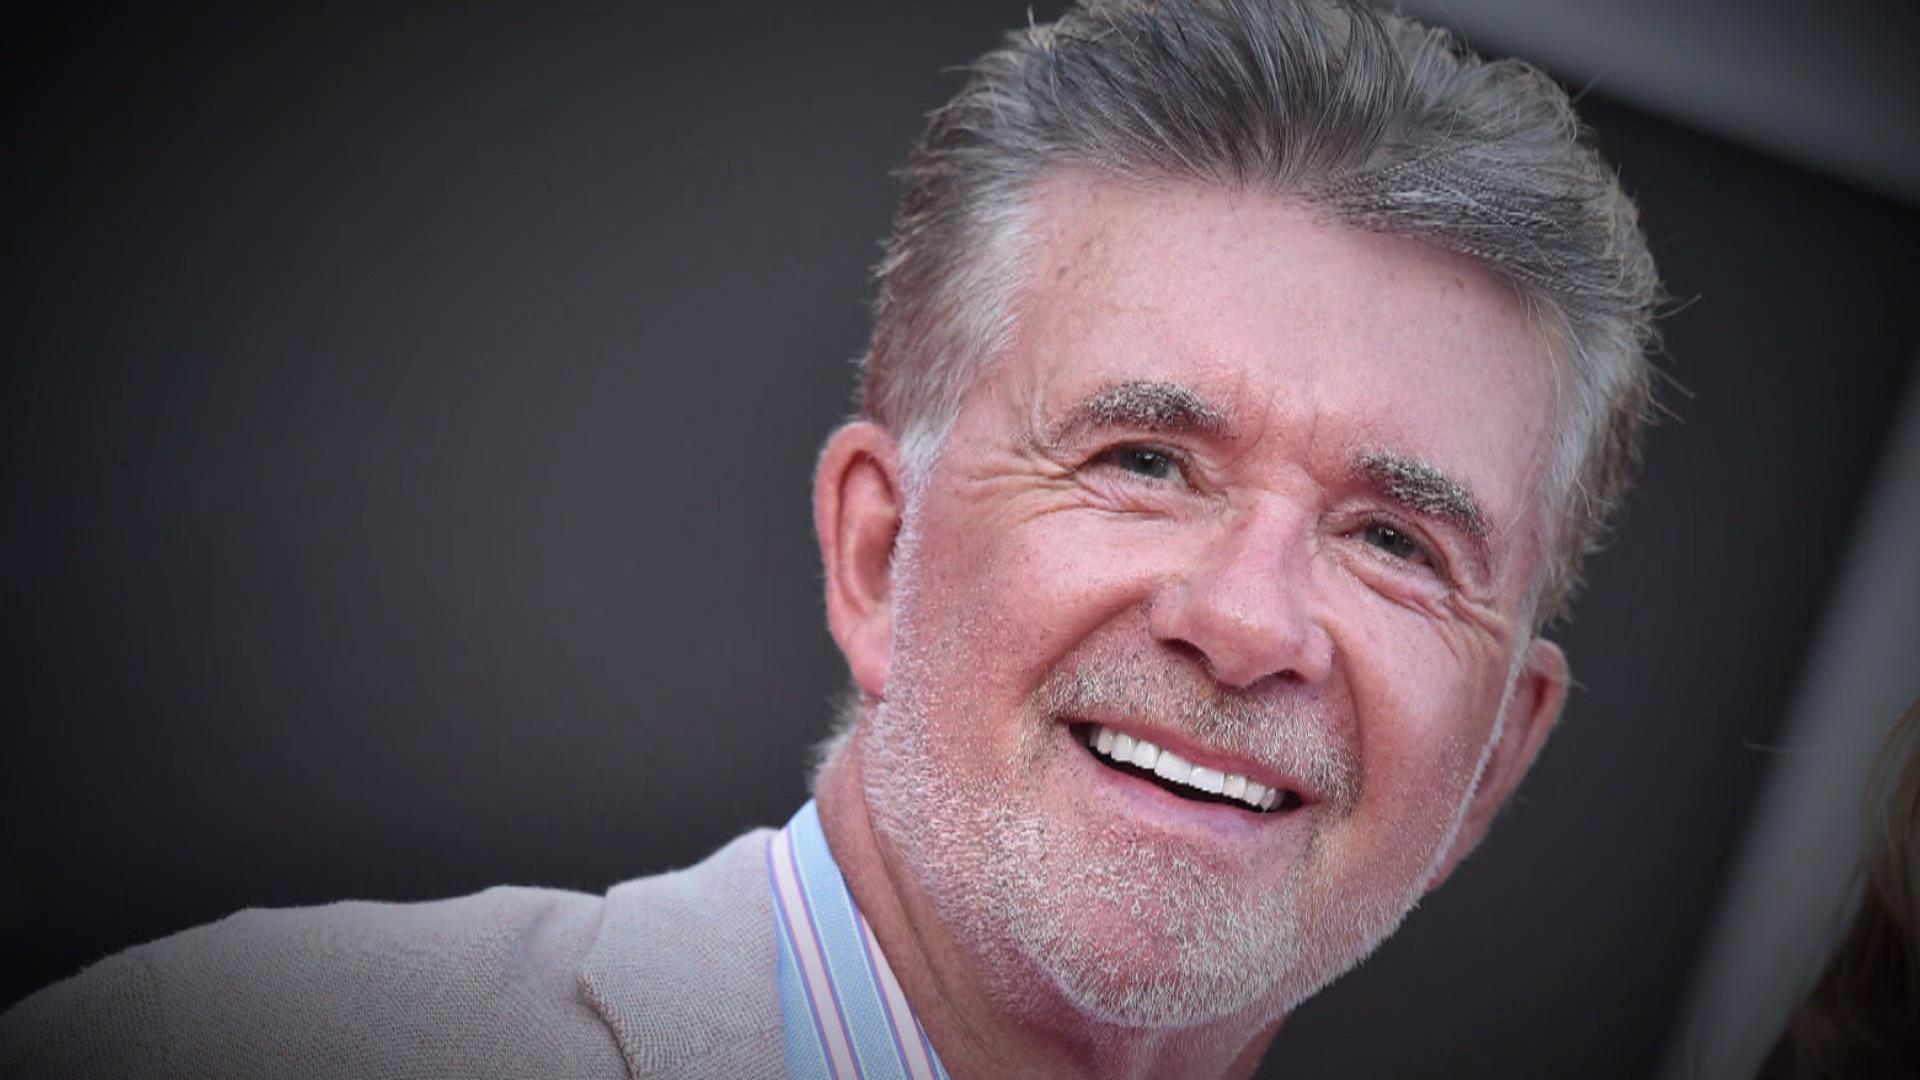 'Growing Pains' actor Alan Thicke dies at 69 after apparent heart attack